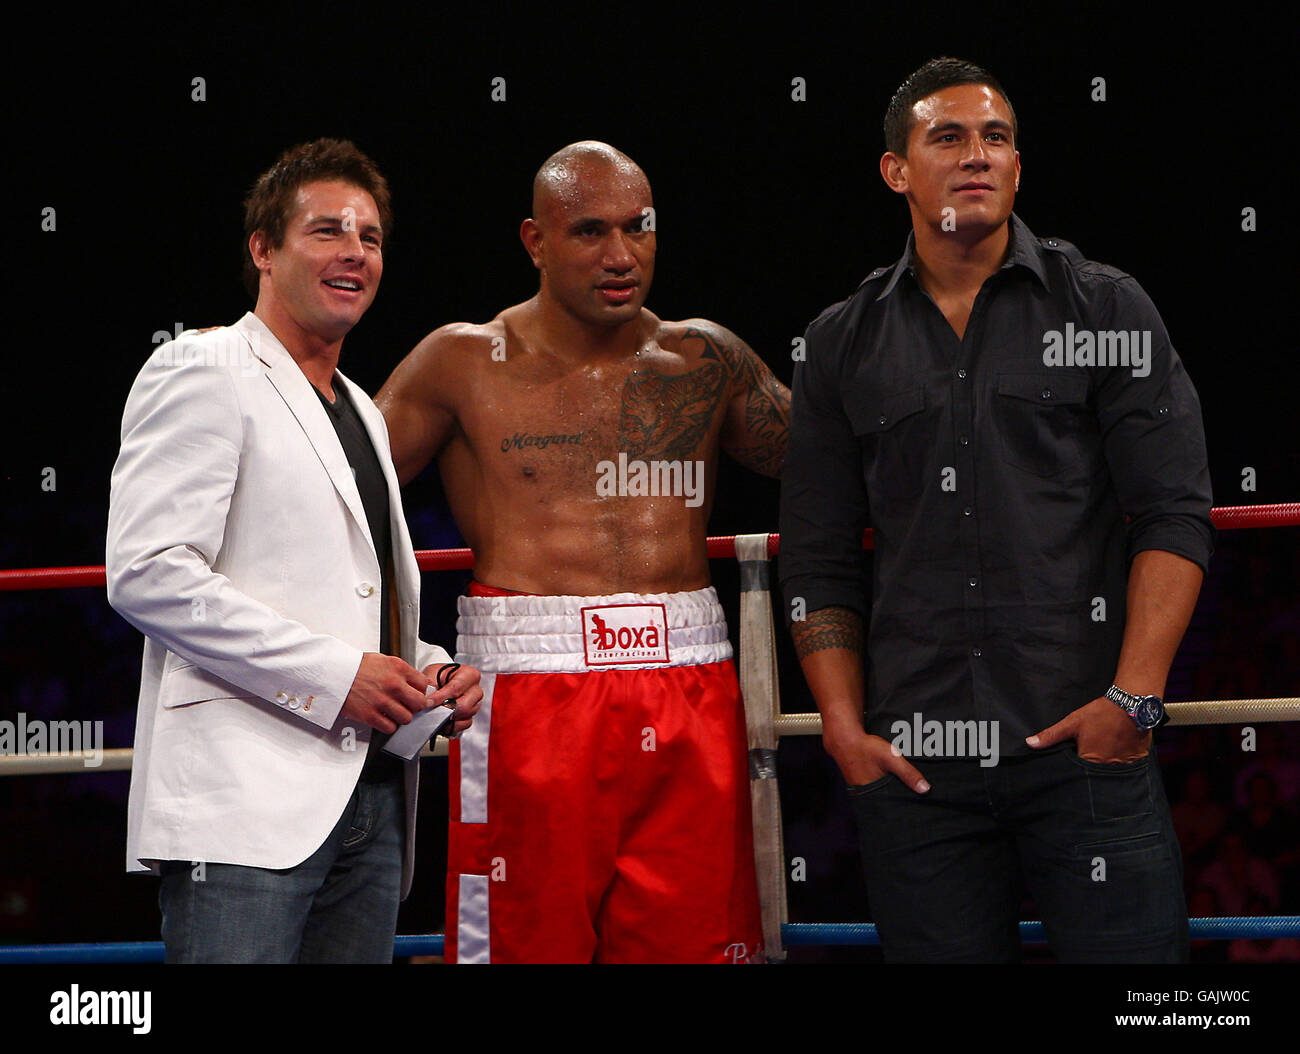 Ex-West Coast Eagles Footballer Ben Cousins joins Solomon Haumono and Sonny-Bill Williams of the Bulldogs prior to Anthony Mundine defending his title defence against Nader Hamdan at the Sydney Entertainment Centre for the WBA Super-Middleweight Title Stock Photo